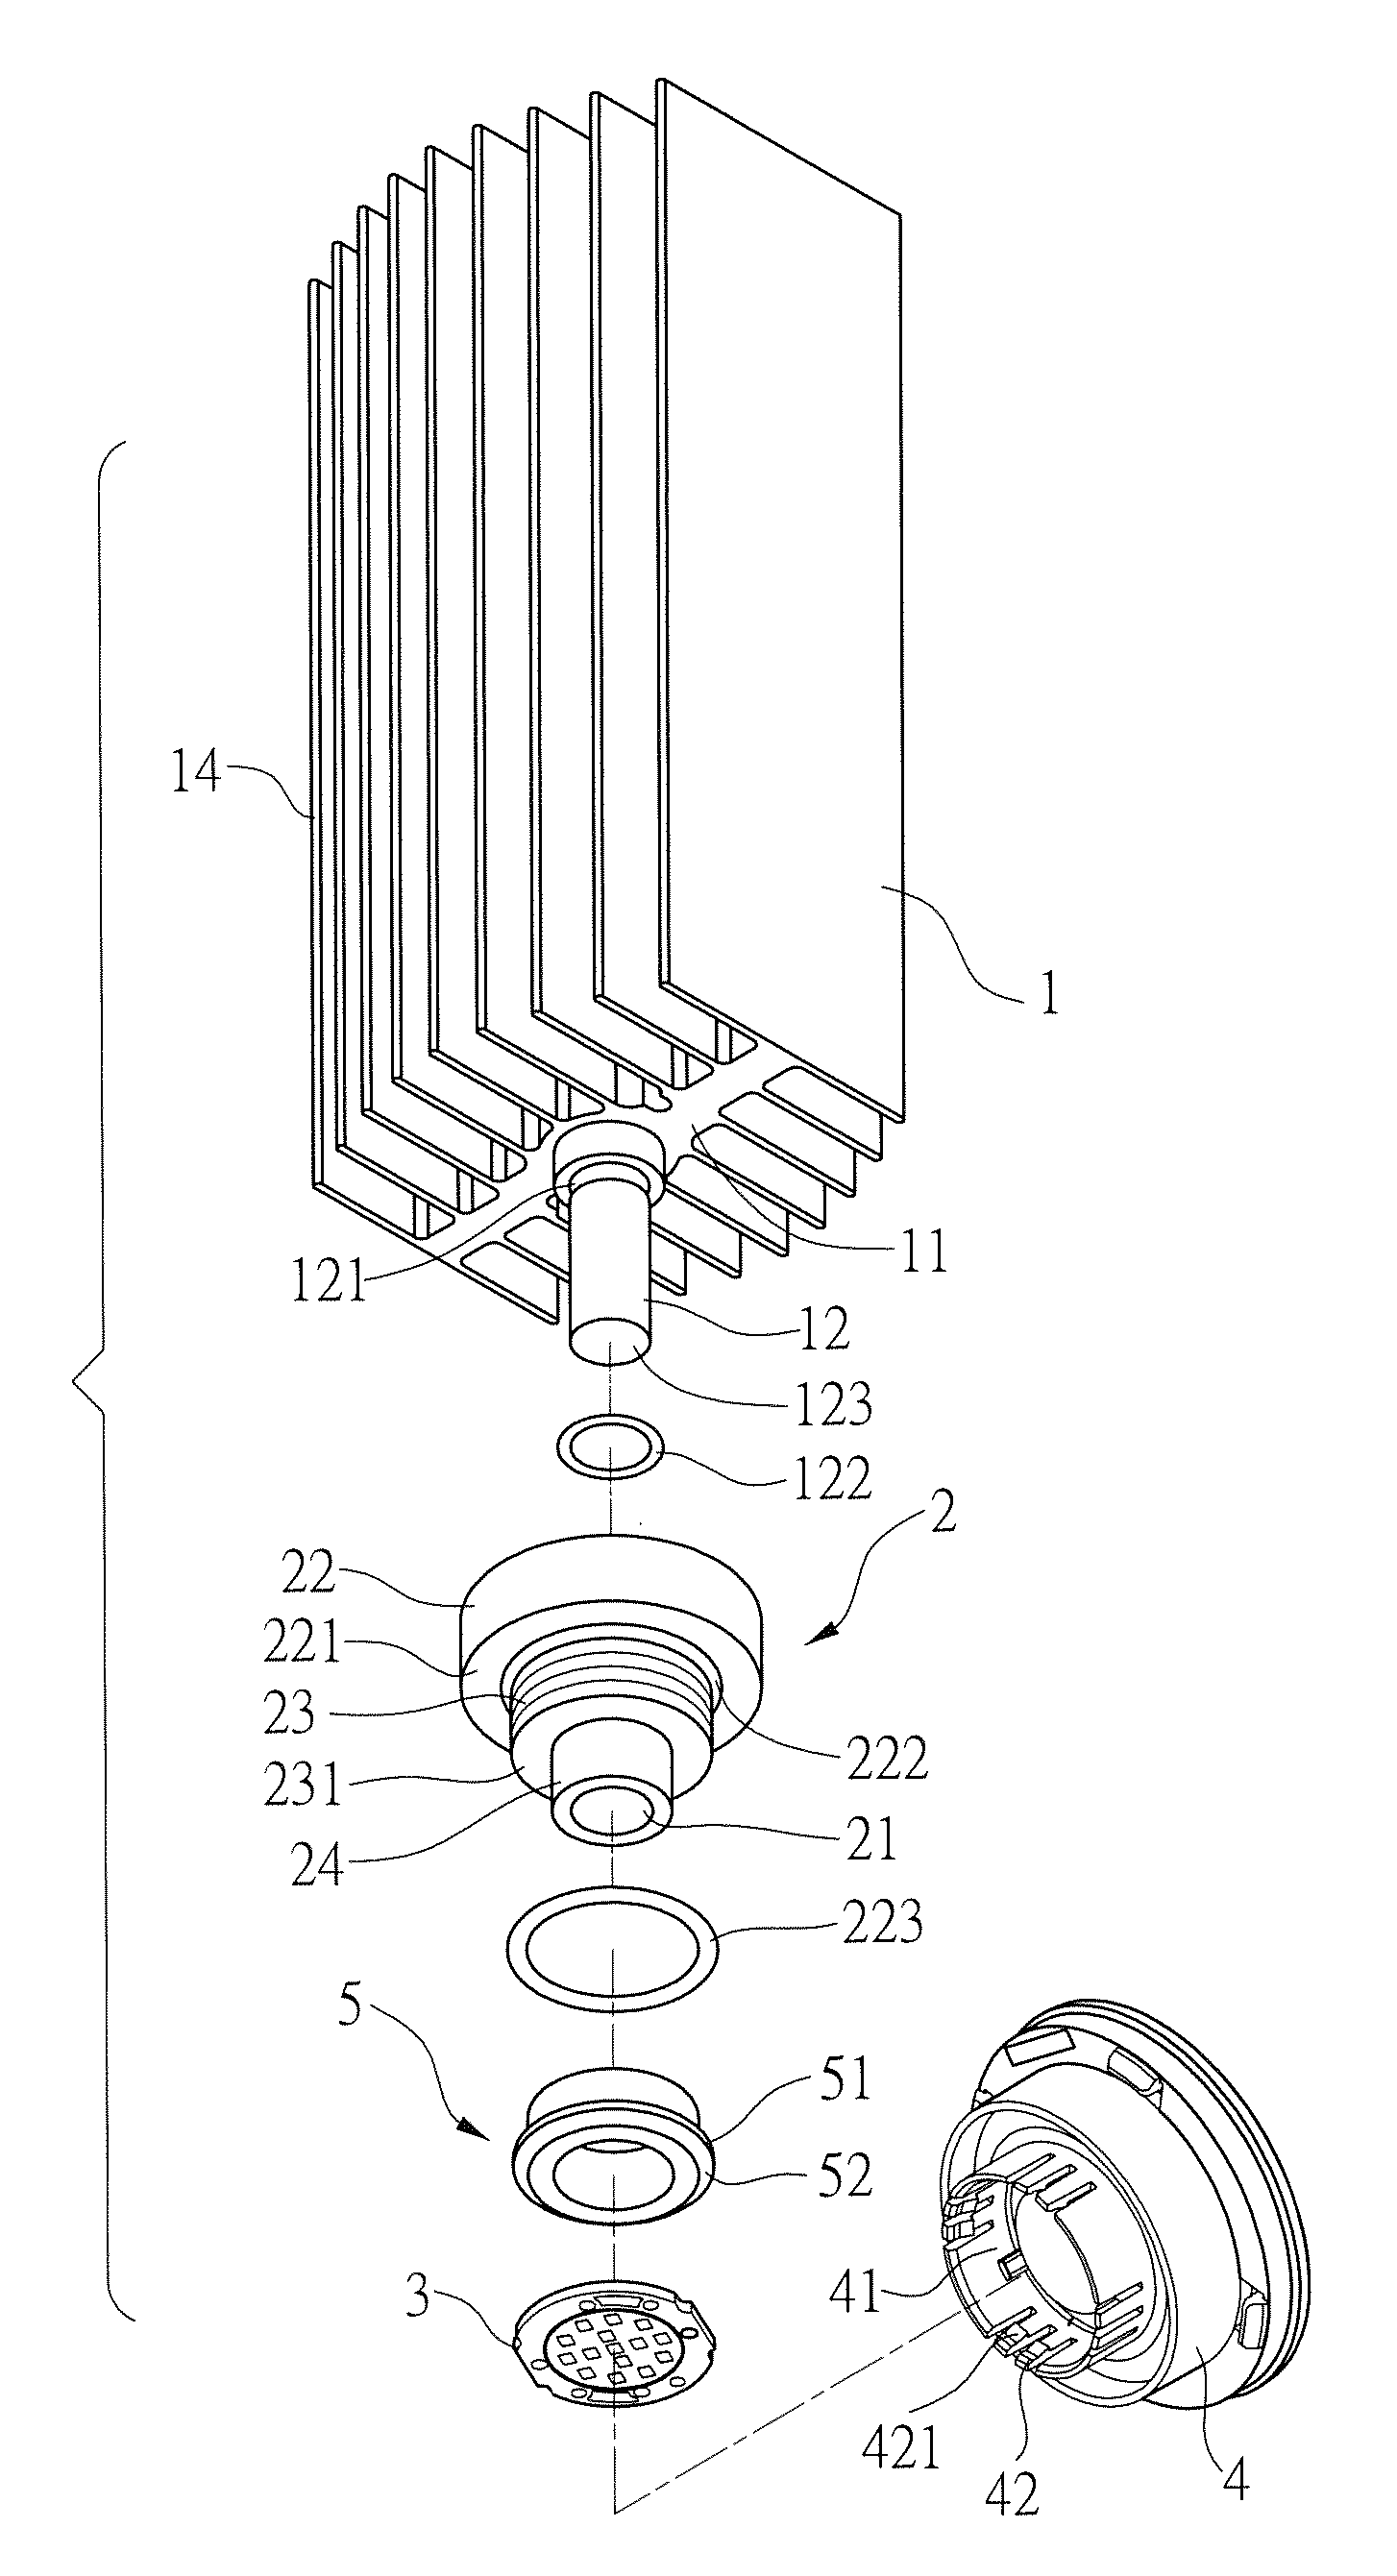 LED heat dissipation structure